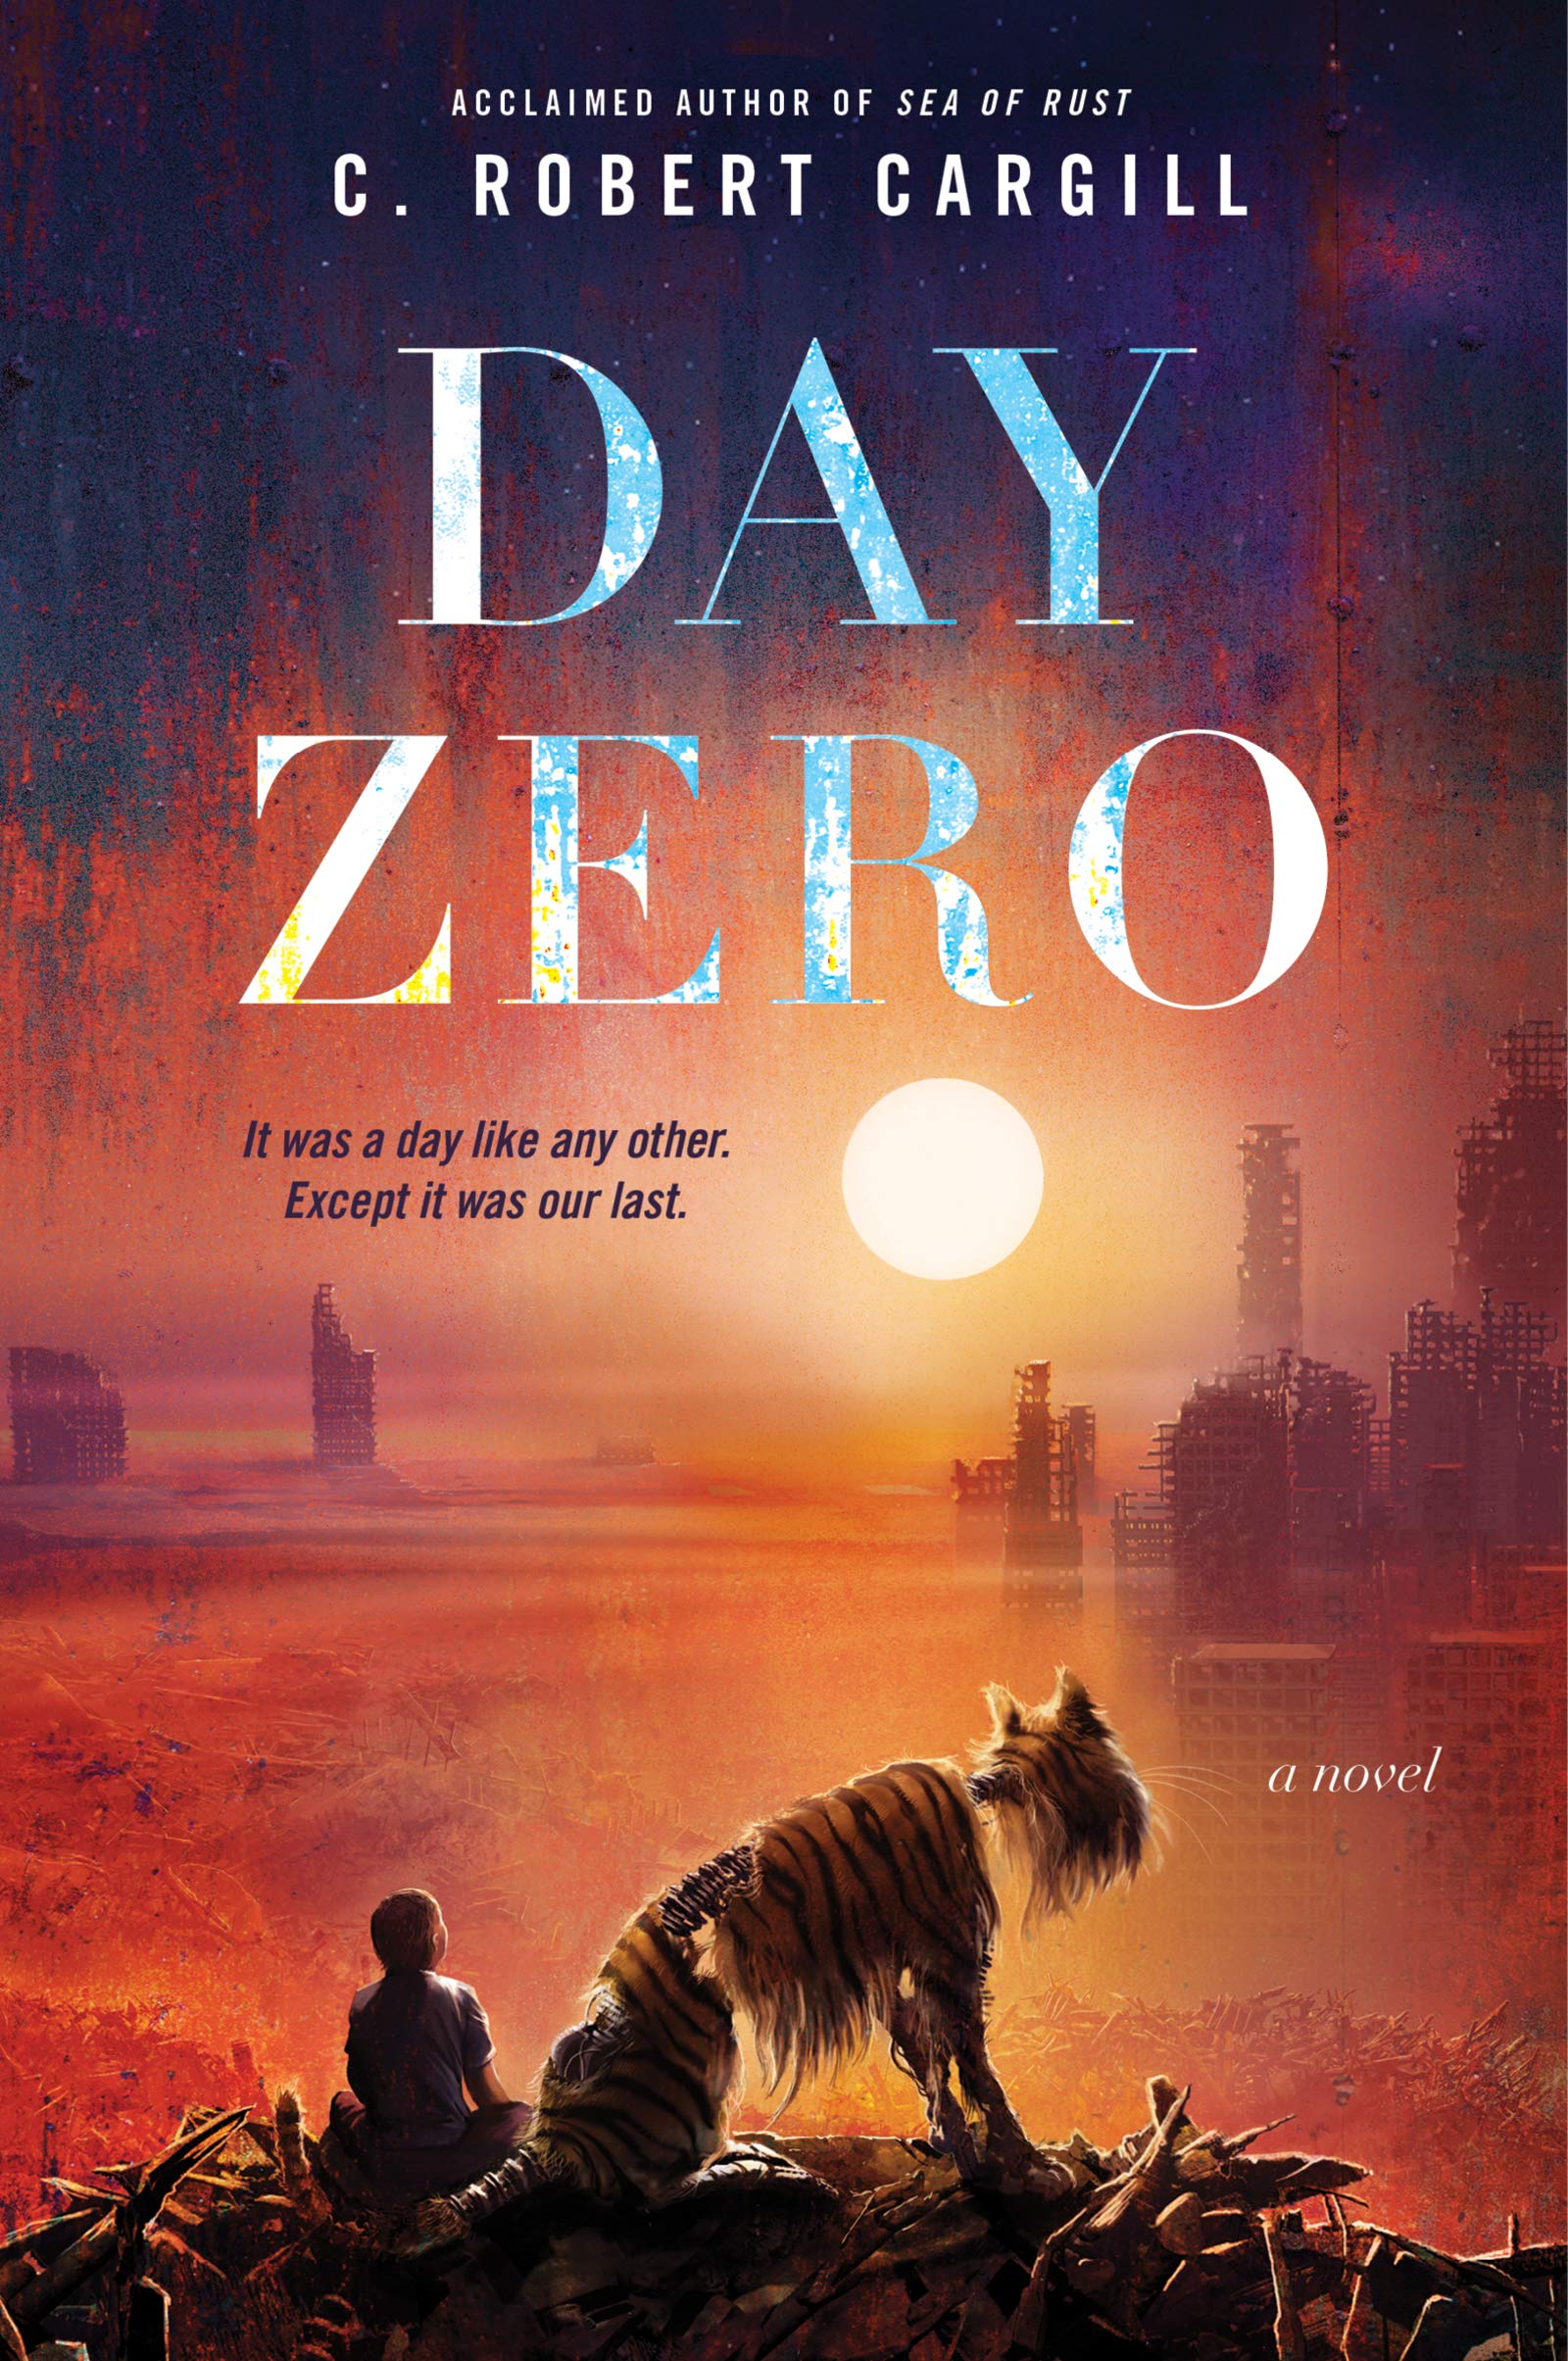 Hardcover　Robert　25,　Webdelico　2021　Novel　A　by　Day　–　C.　Zero:　May　Cargill